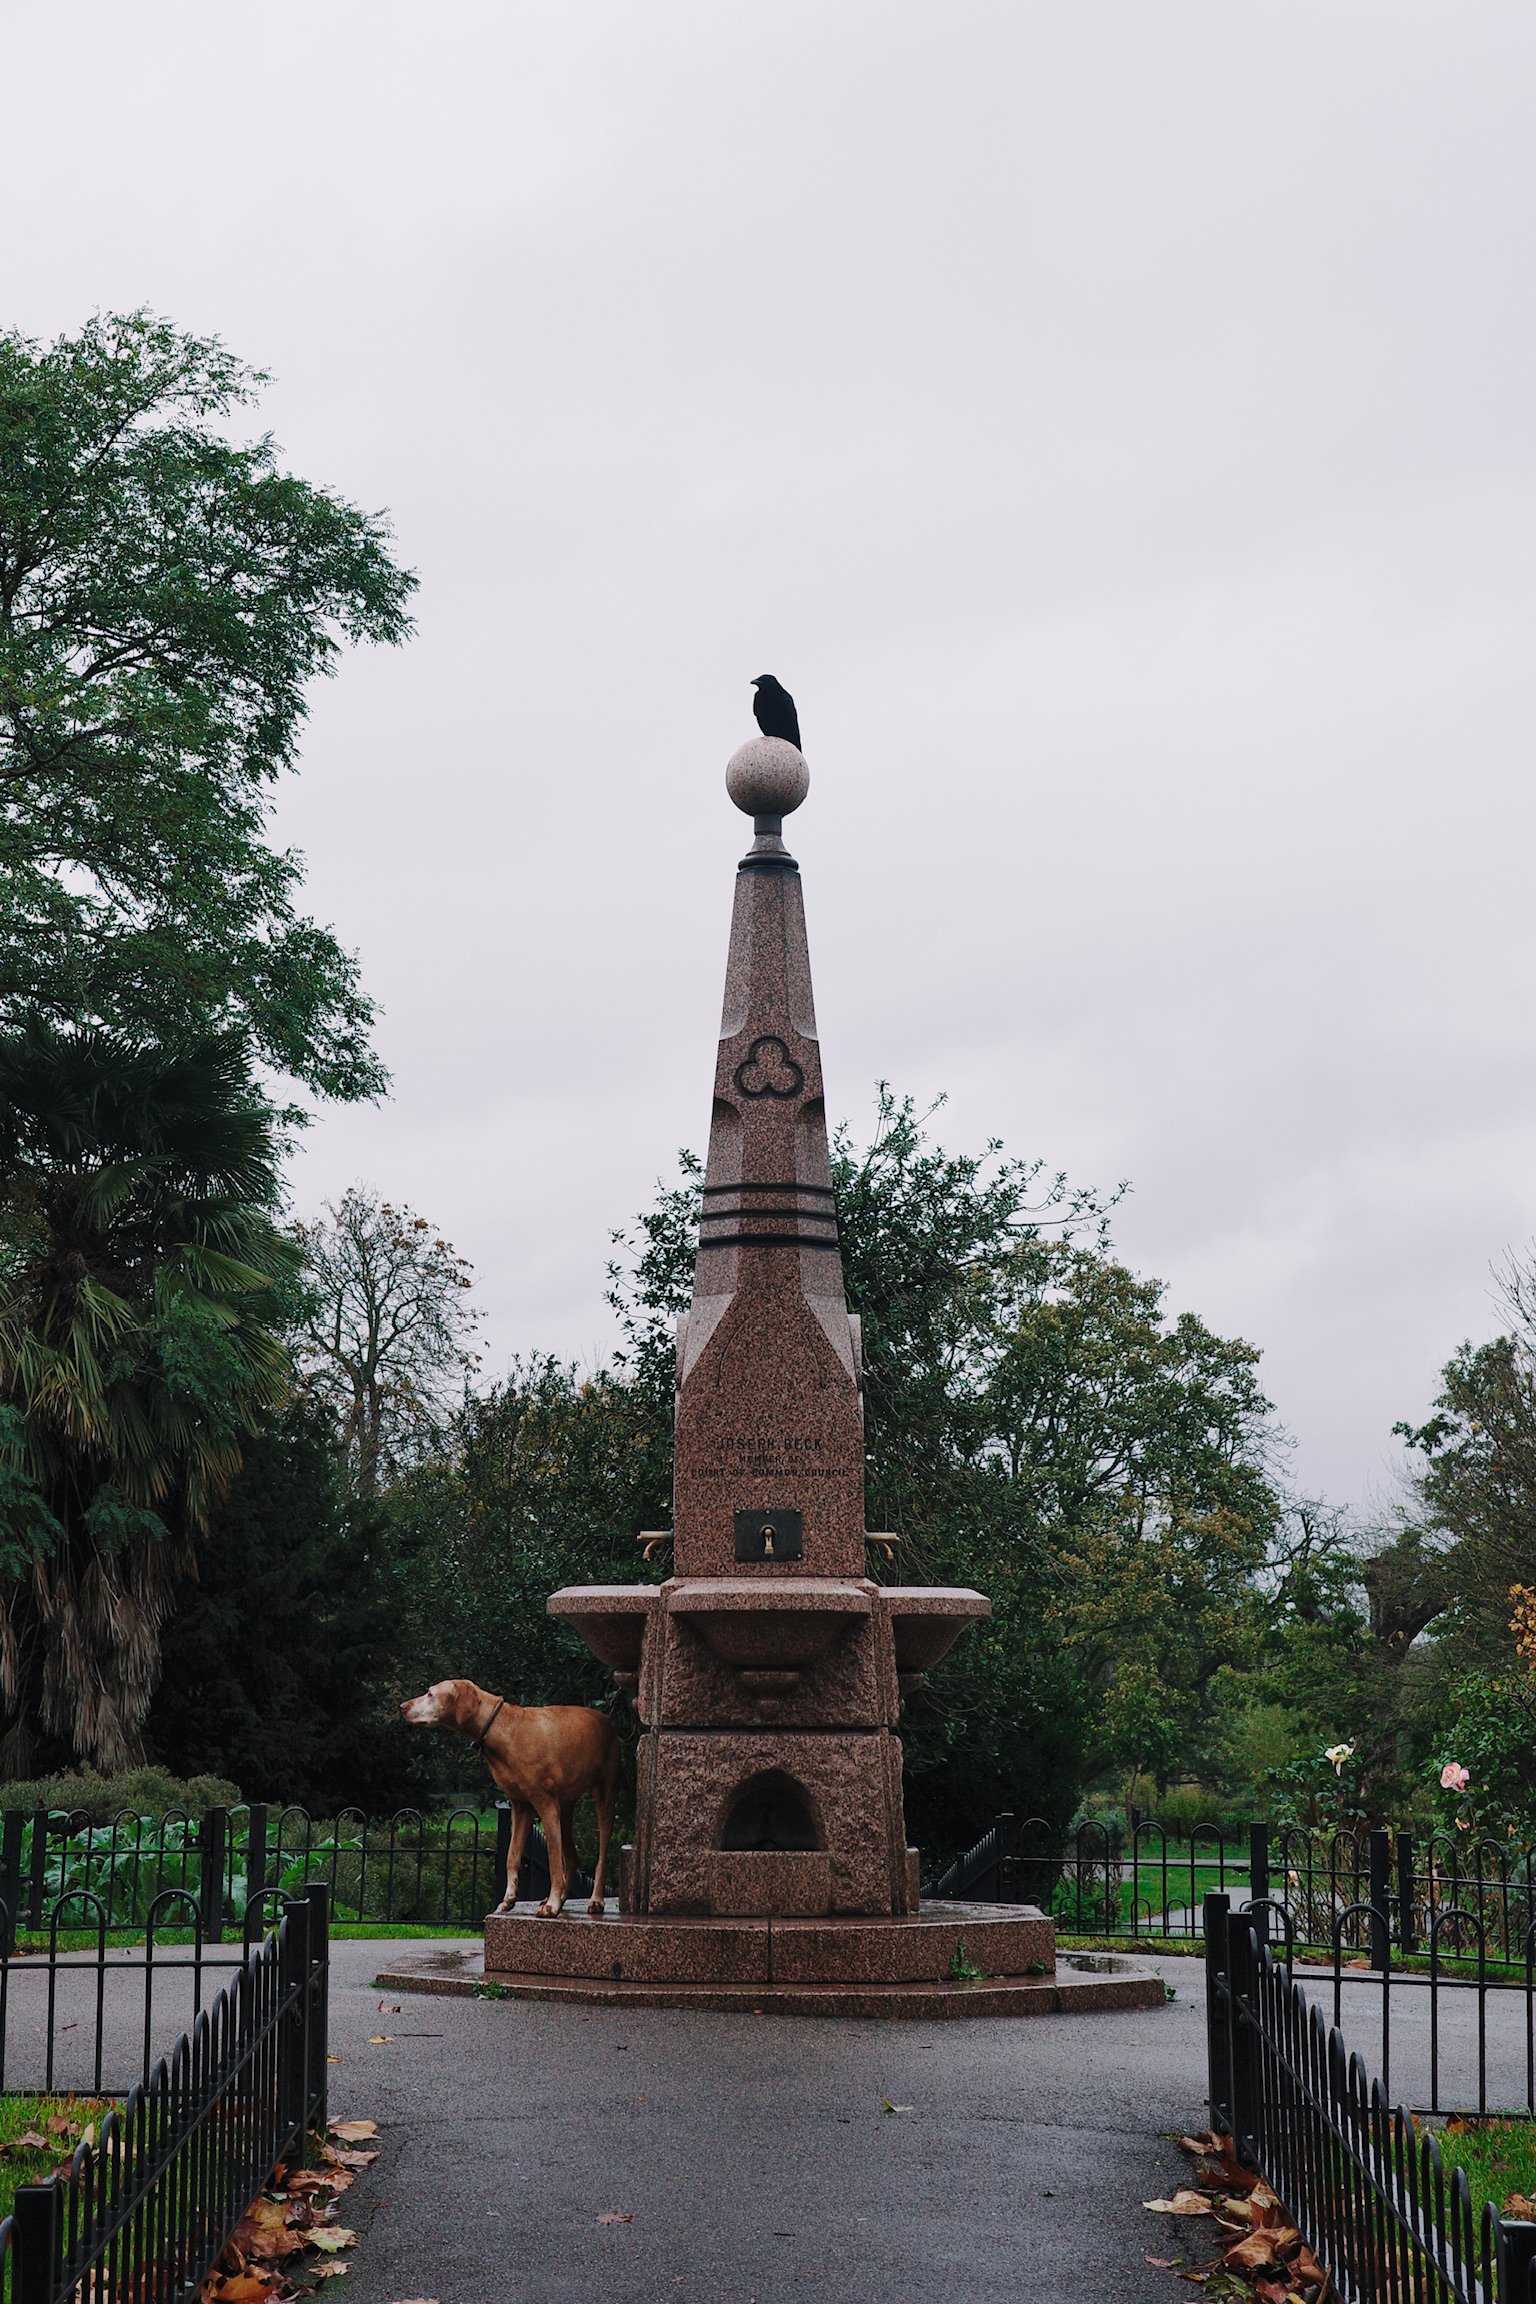 A crow standing on top of the Joseph Beck memorial fountain and a dog standing by the side looking leftwards to its owners.